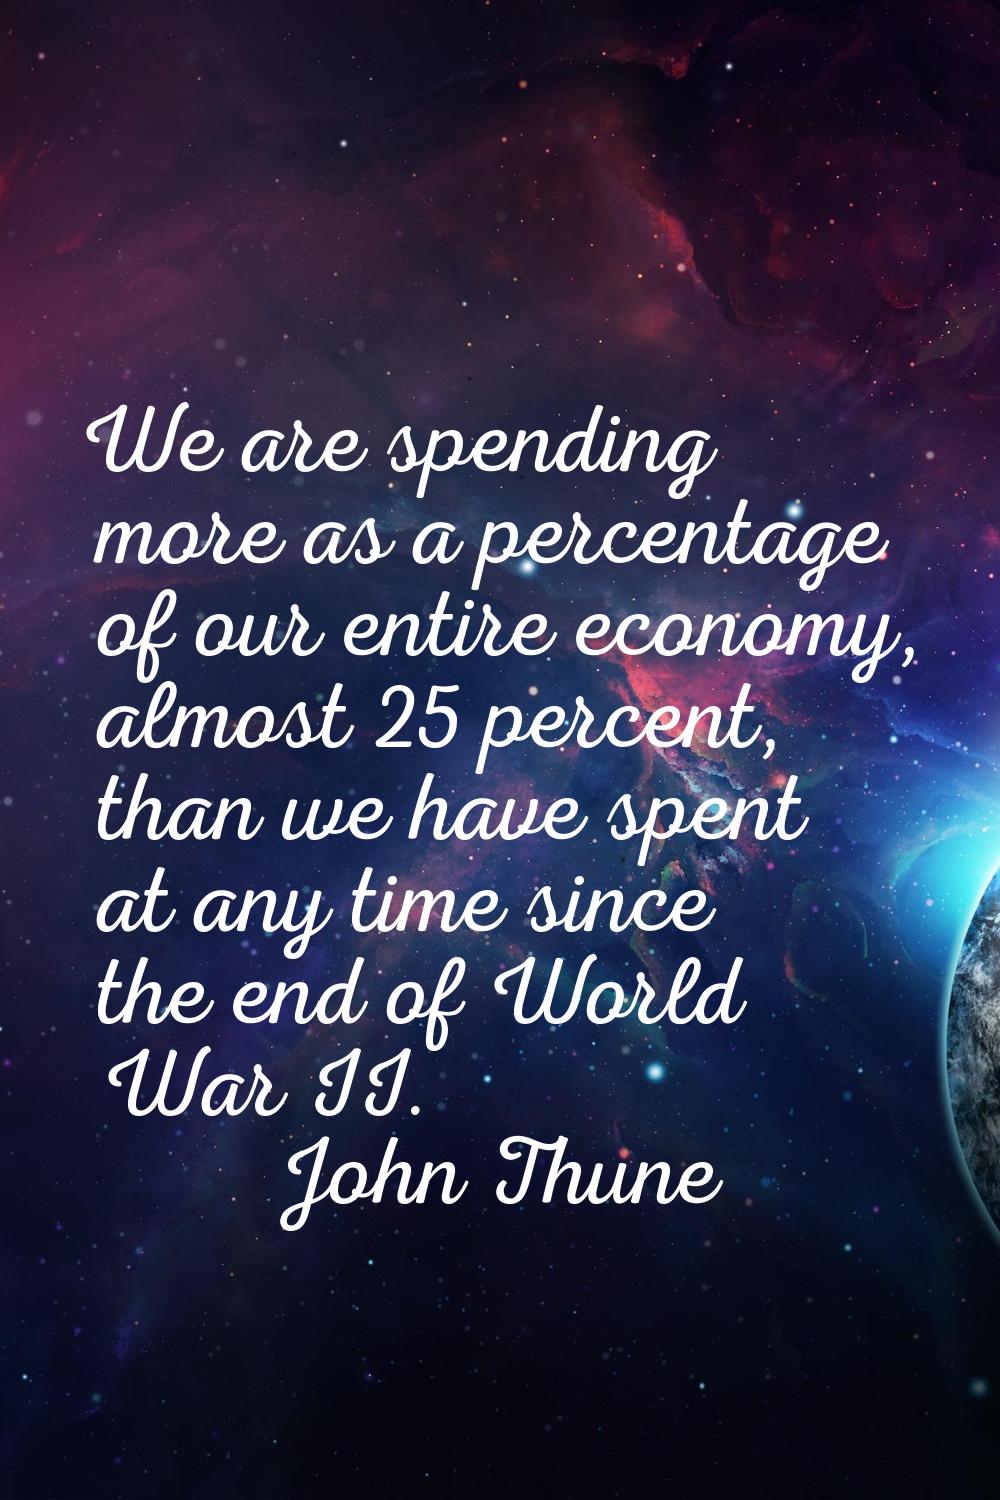 We are spending more as a percentage of our entire economy, almost 25 percent, than we have spent a